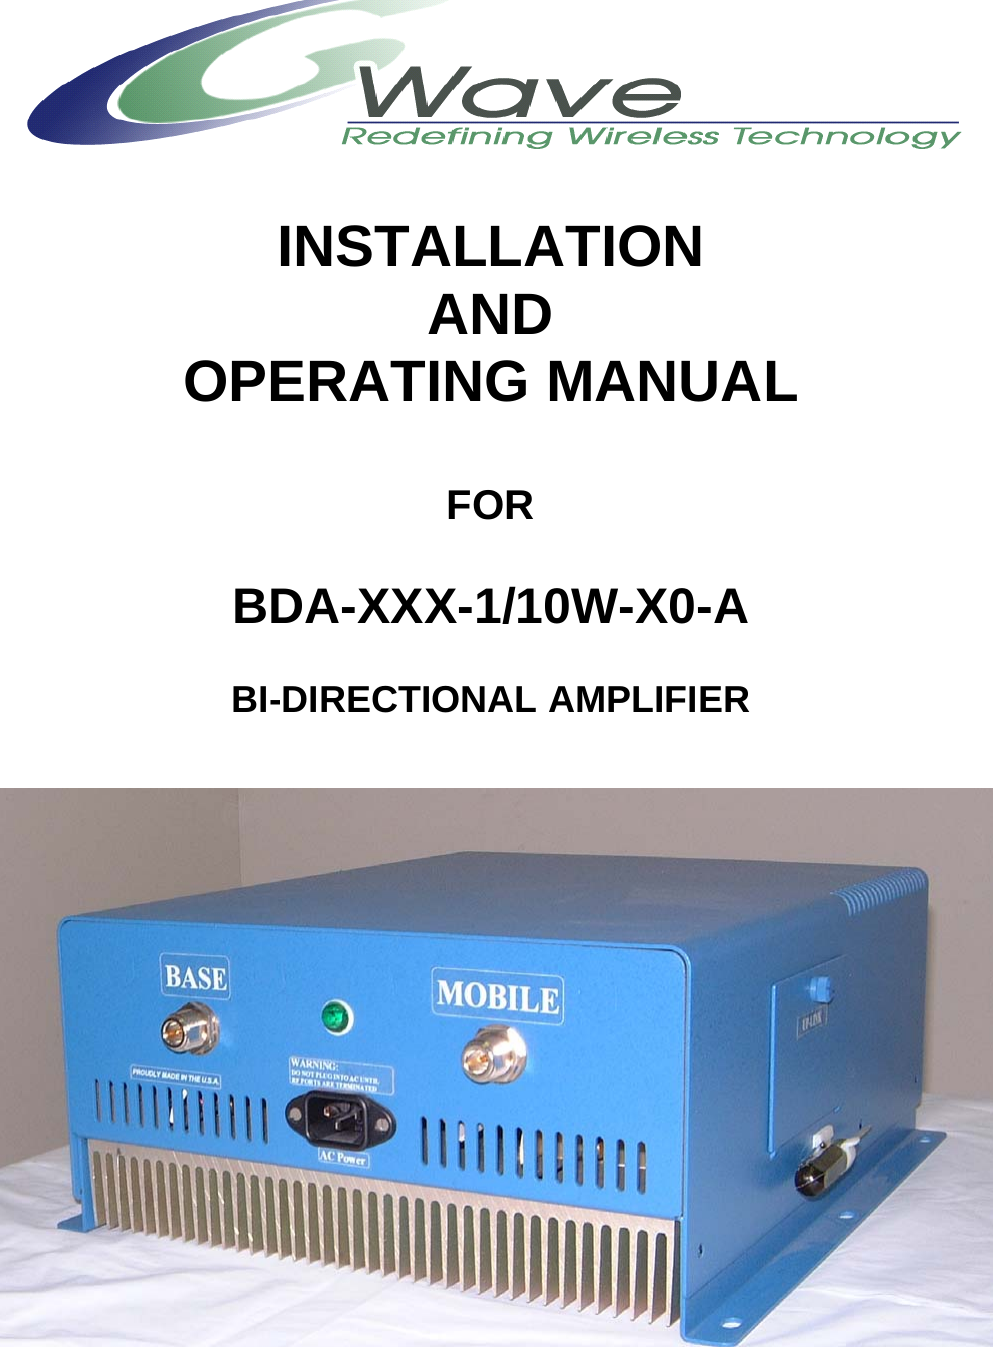    INSTALLATION AND OPERATING MANUAL  FOR  BDA-XXX-1/10W-X0-A  BI-DIRECTIONAL AMPLIFIER   